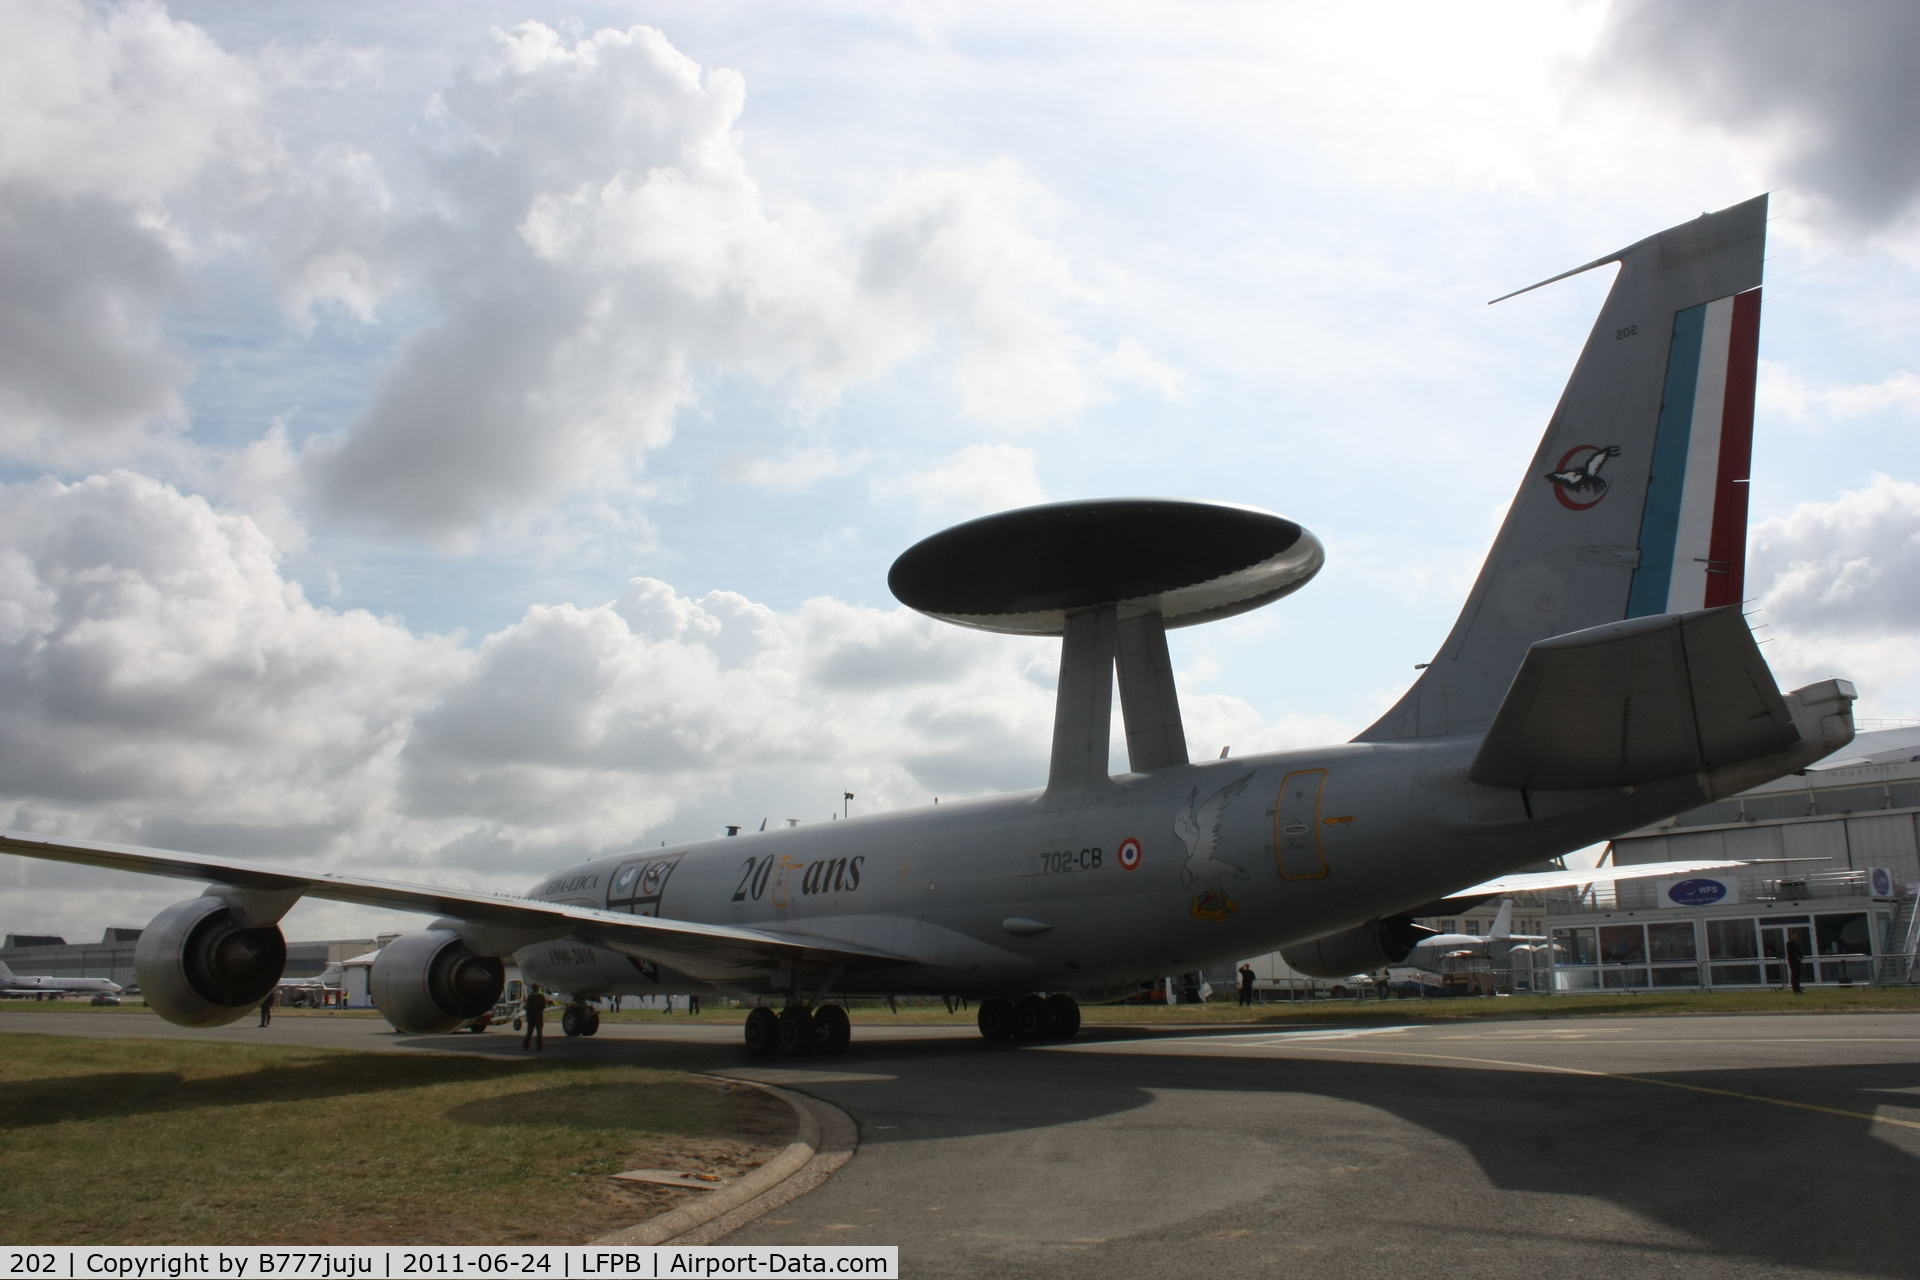 202, 1990 Boeing E-3F (707-300) Sentry C/N 24116, on display at SIAE 2011